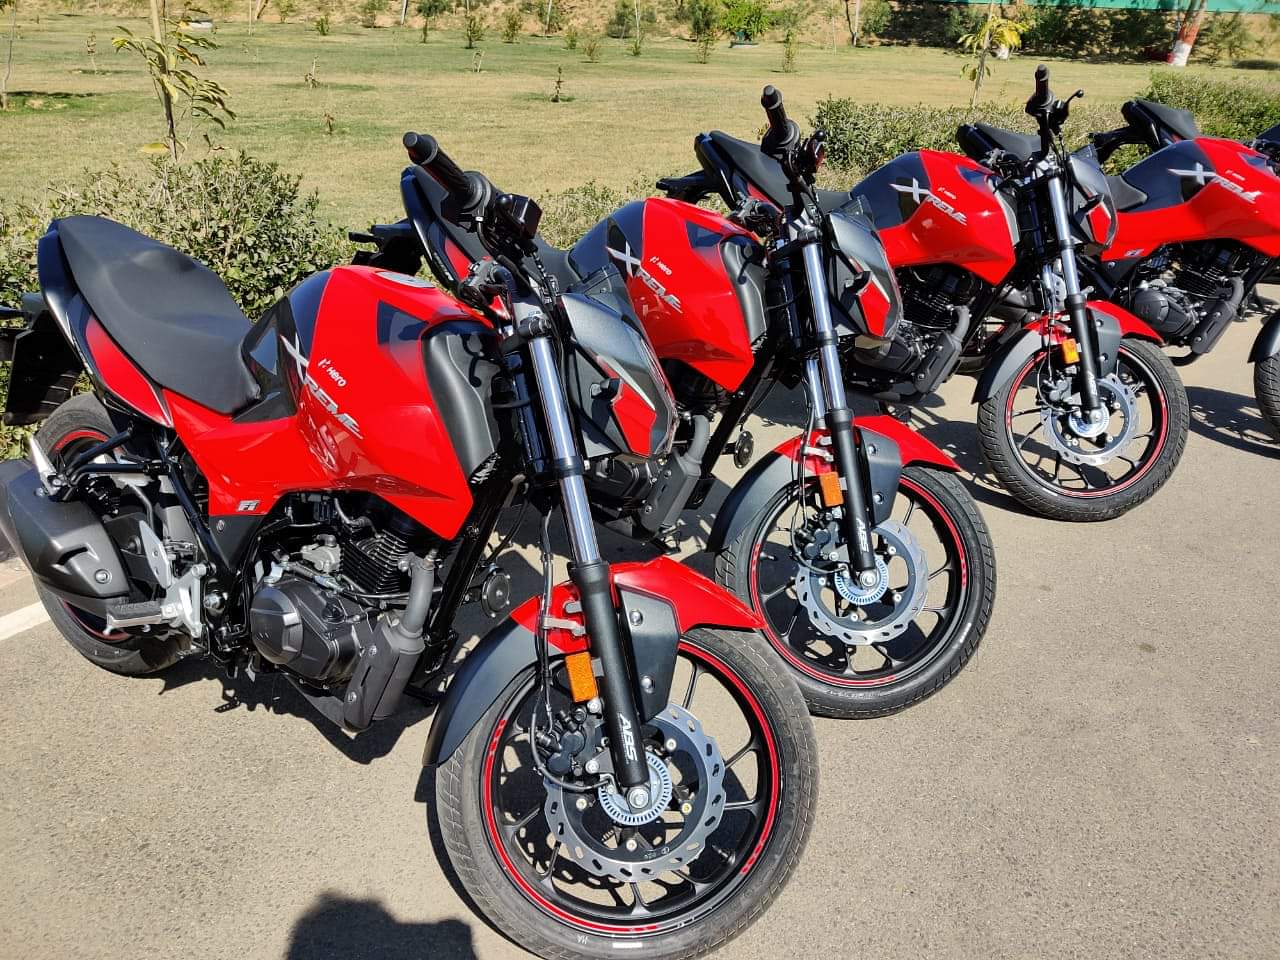 Hero MotoCorp BS6 bikes: Passion Pro, Glamour 125 and Xtreme 160R